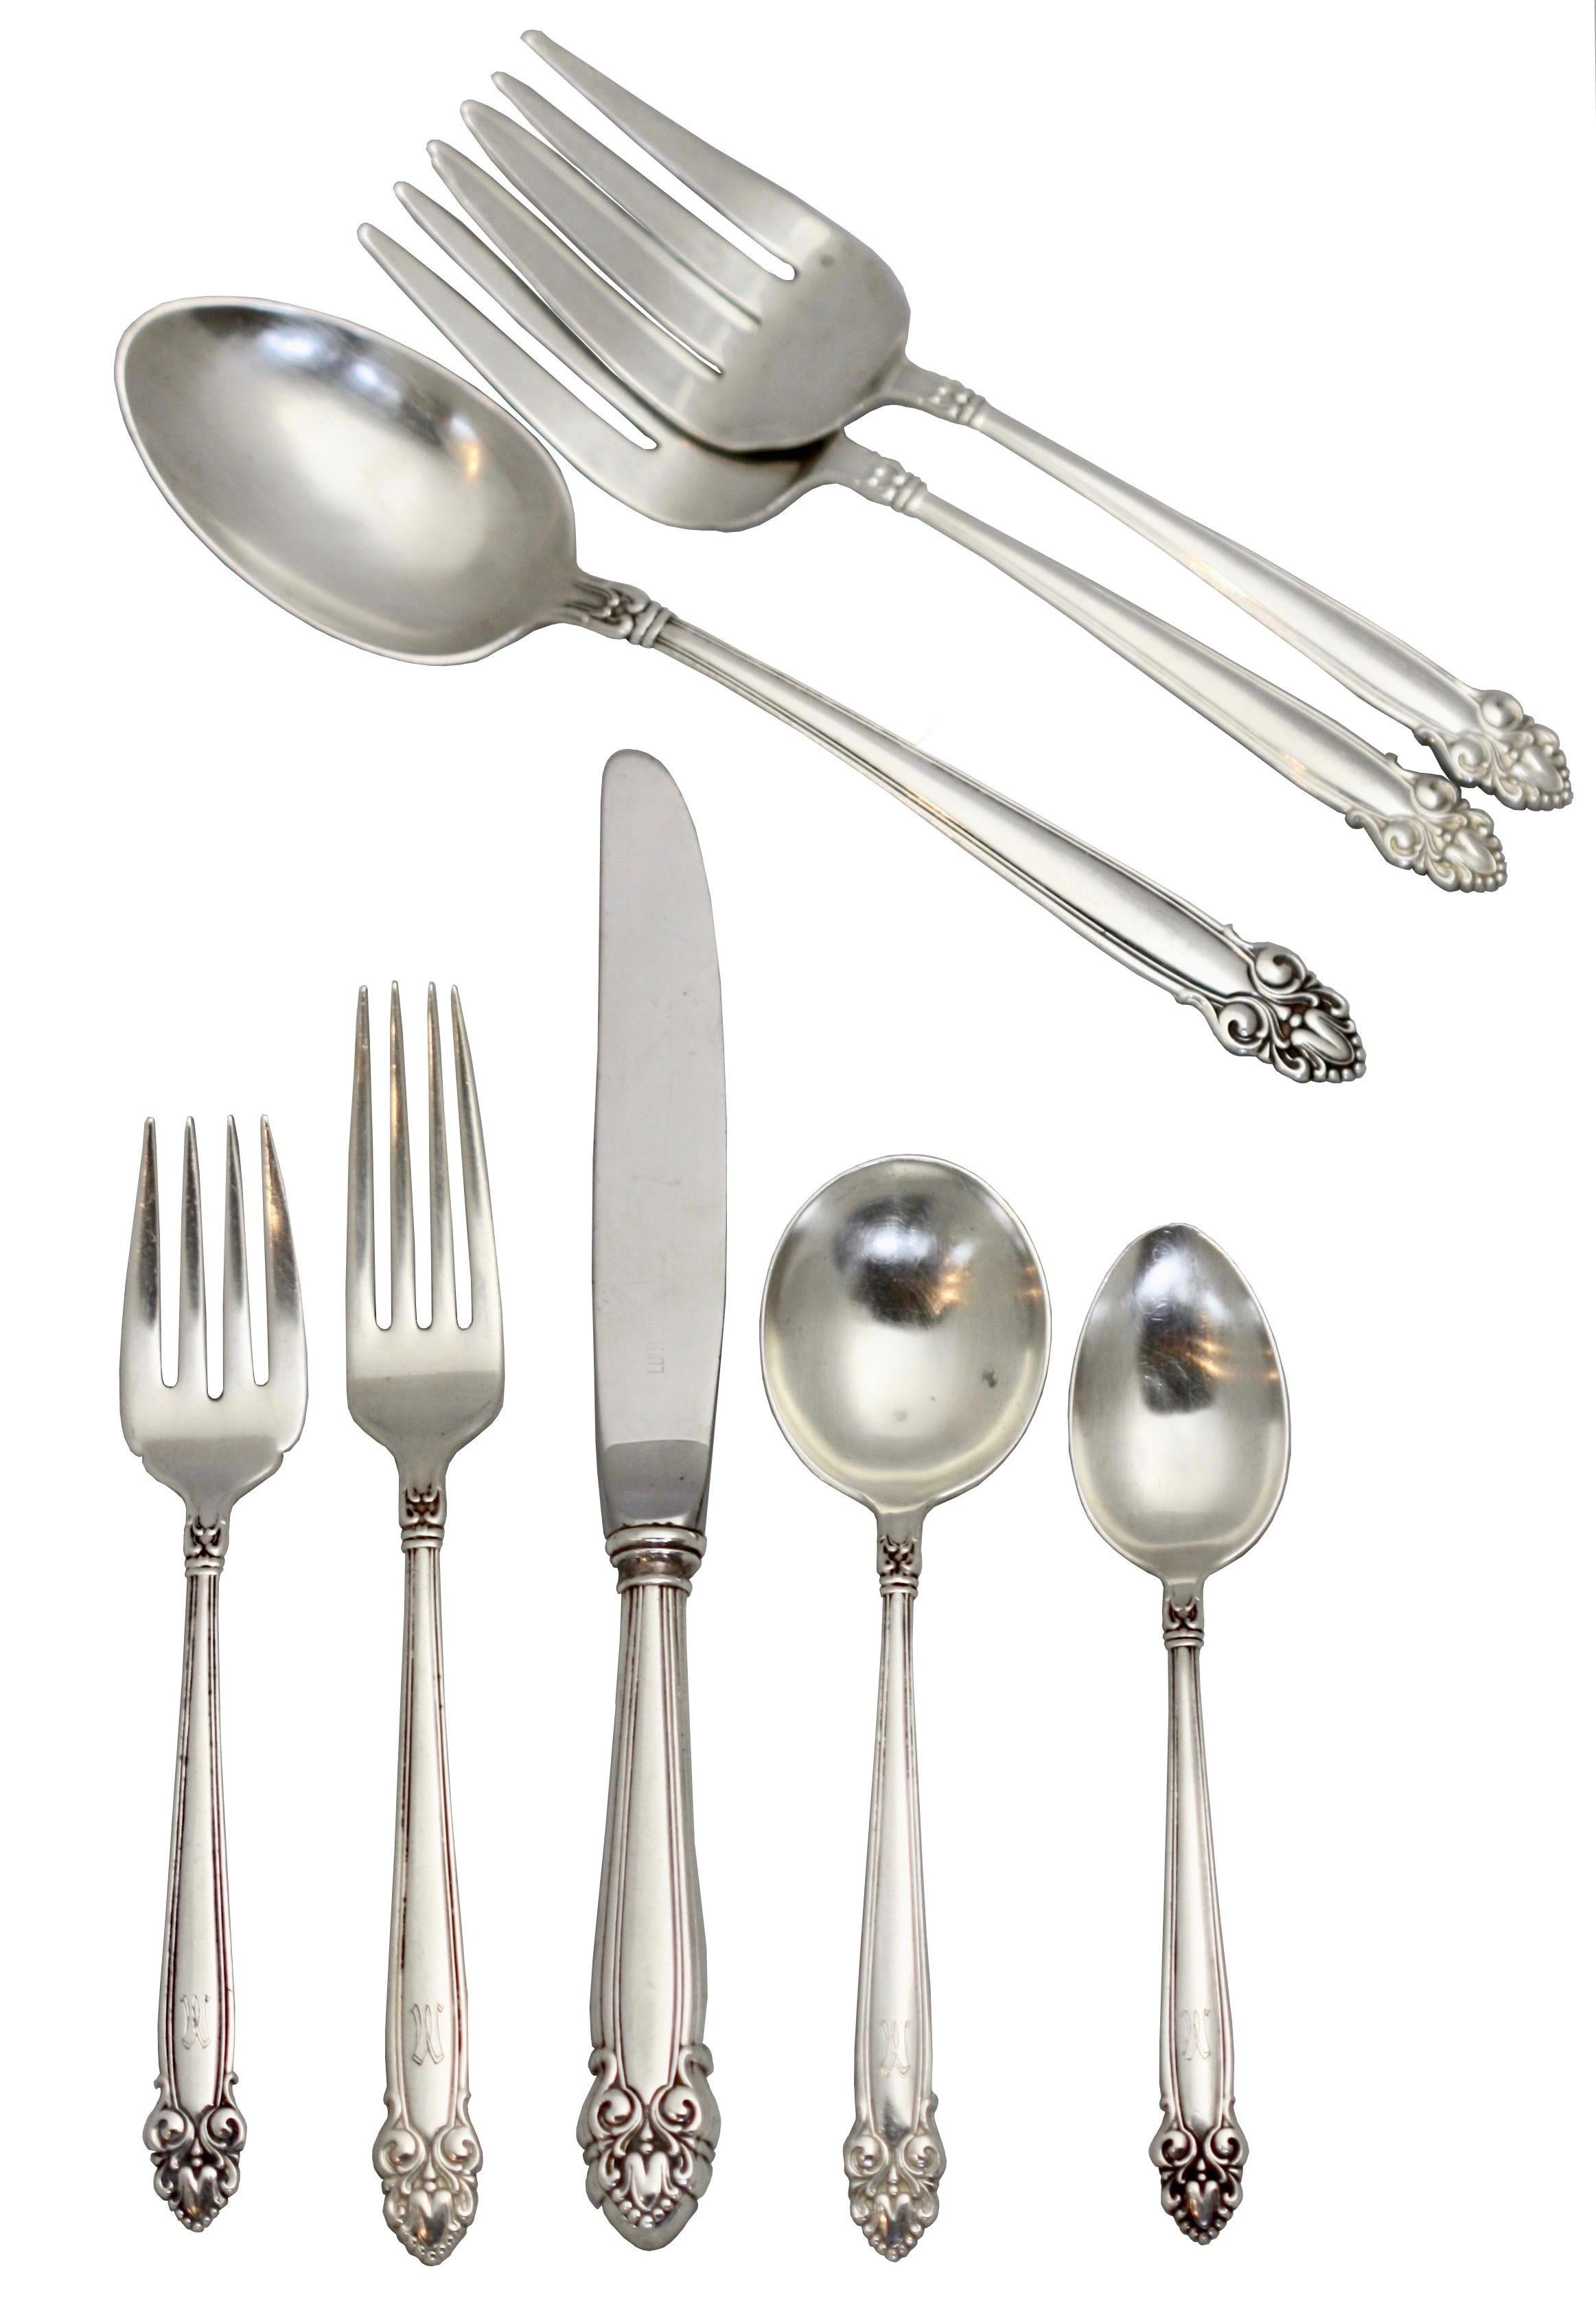 Sterling silver flatware set by Lunt 
consisting of: 
6 dinner knives (8 7/8 in.)
7 dinner forks (7 1/4 in.)
7 salad forks (6 3/8 in.)
8 round soup spoons (6 1/4 in.)
7 teaspoons (5 3/4 in.)
1 serving spoon (8 1/4 in.)
2 serving forks (7 1/2